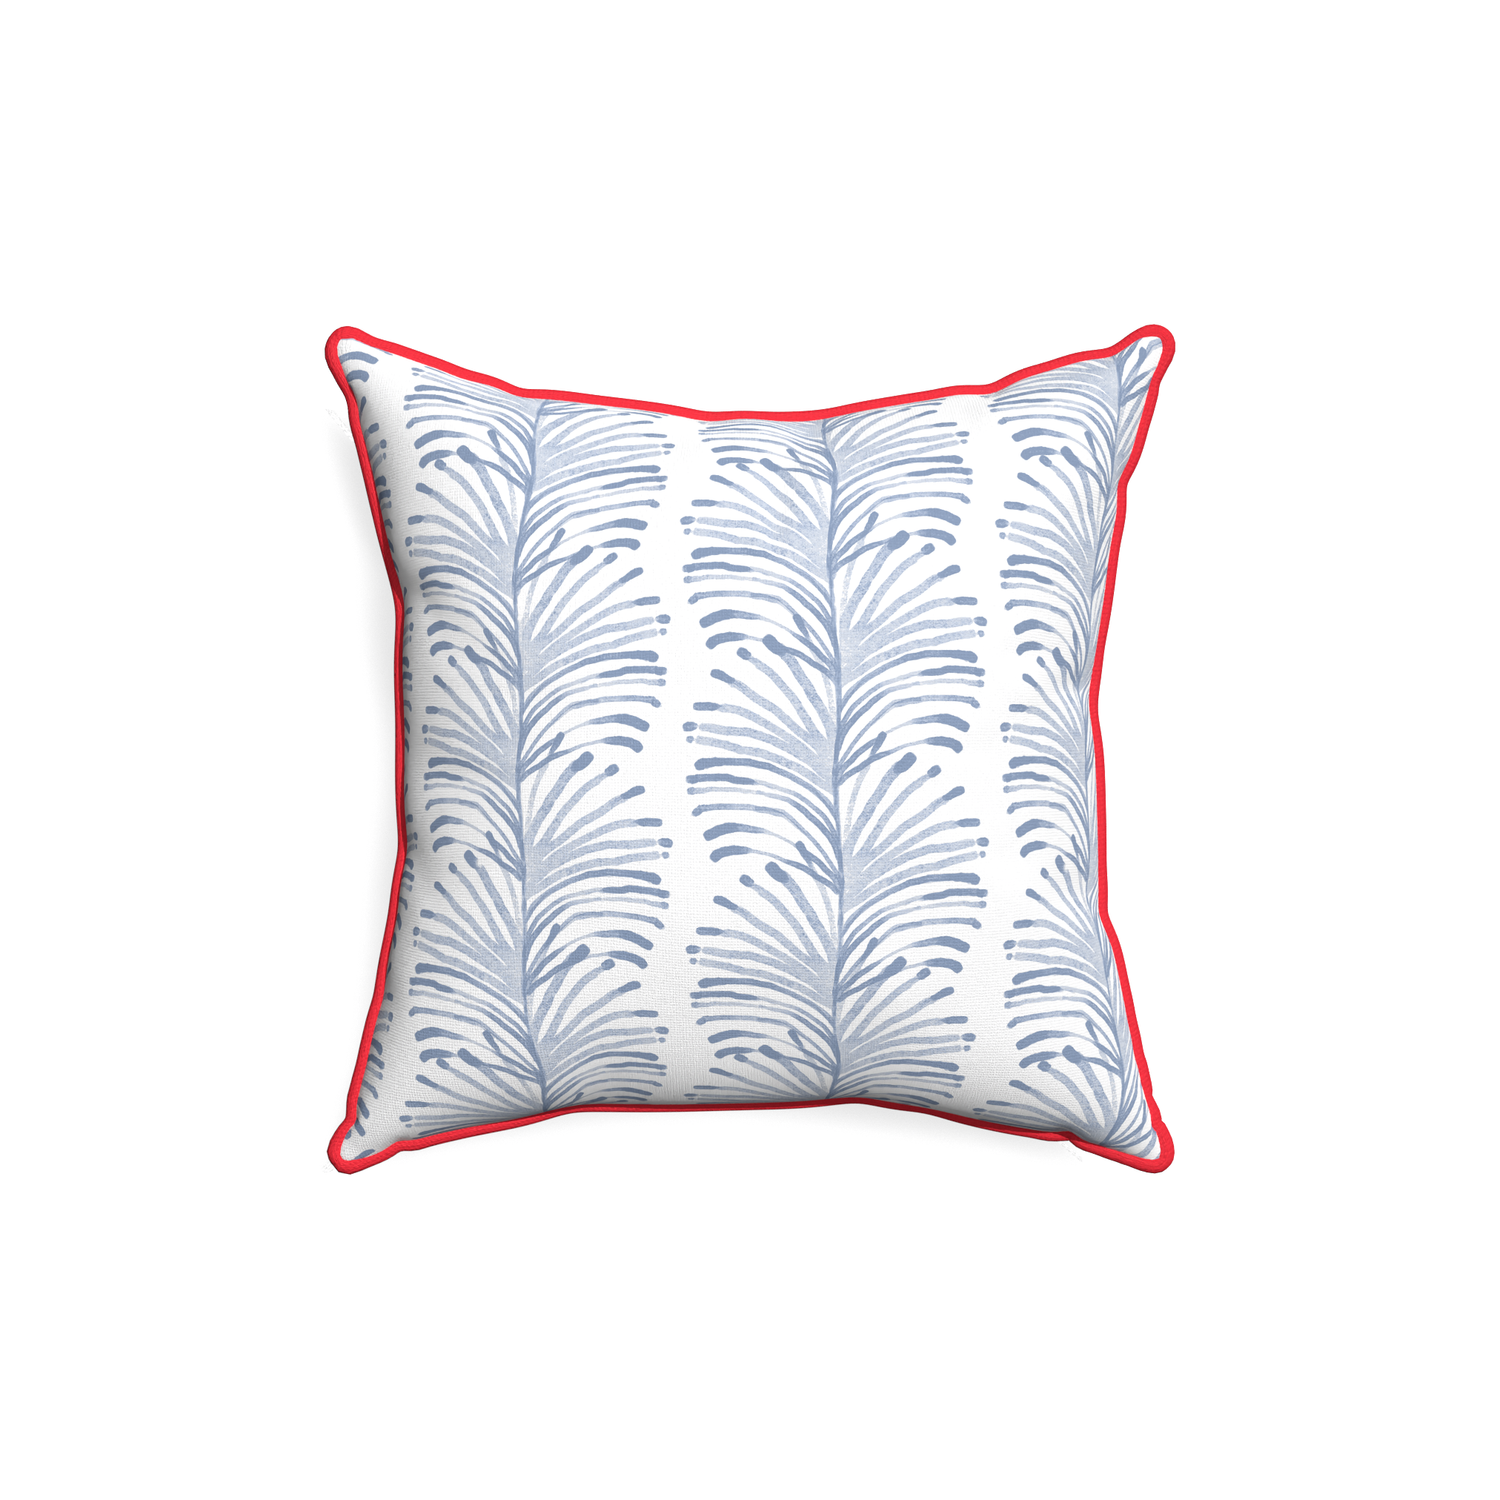 18-square emma sky custom sky blue botanical stripepillow with cherry piping on white background